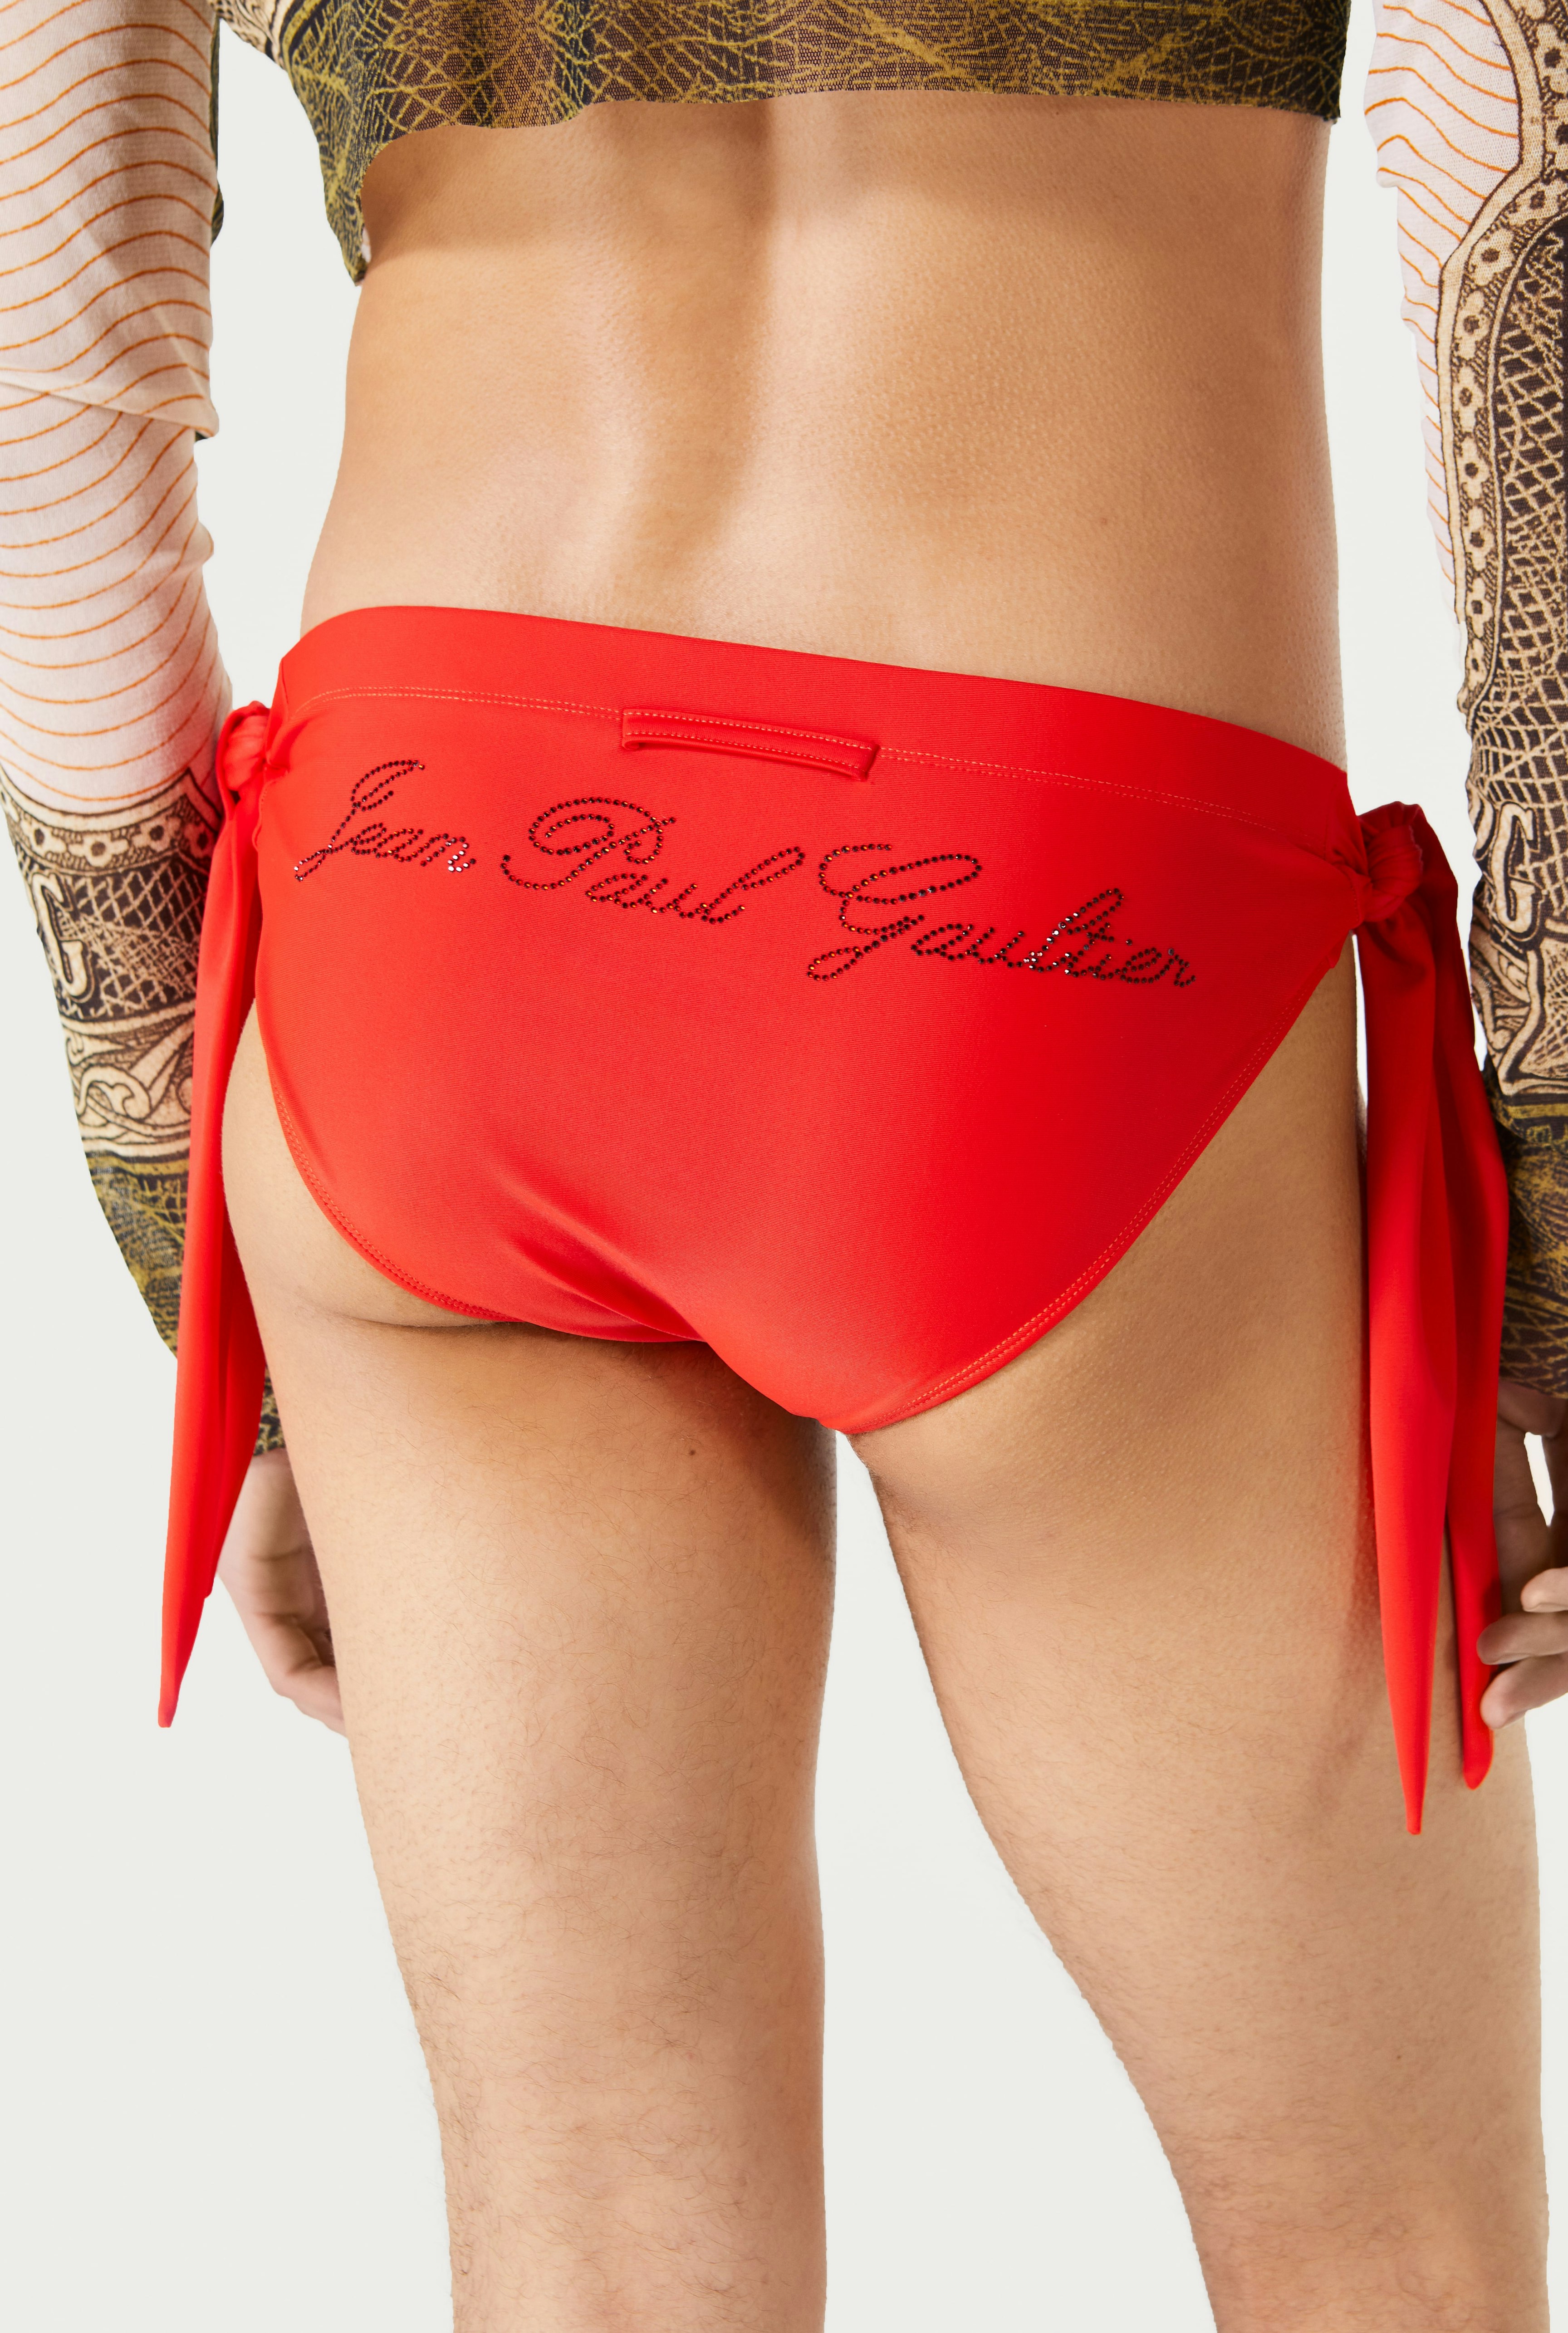 The Red Jean Paul Gaultier Swimming Briefs